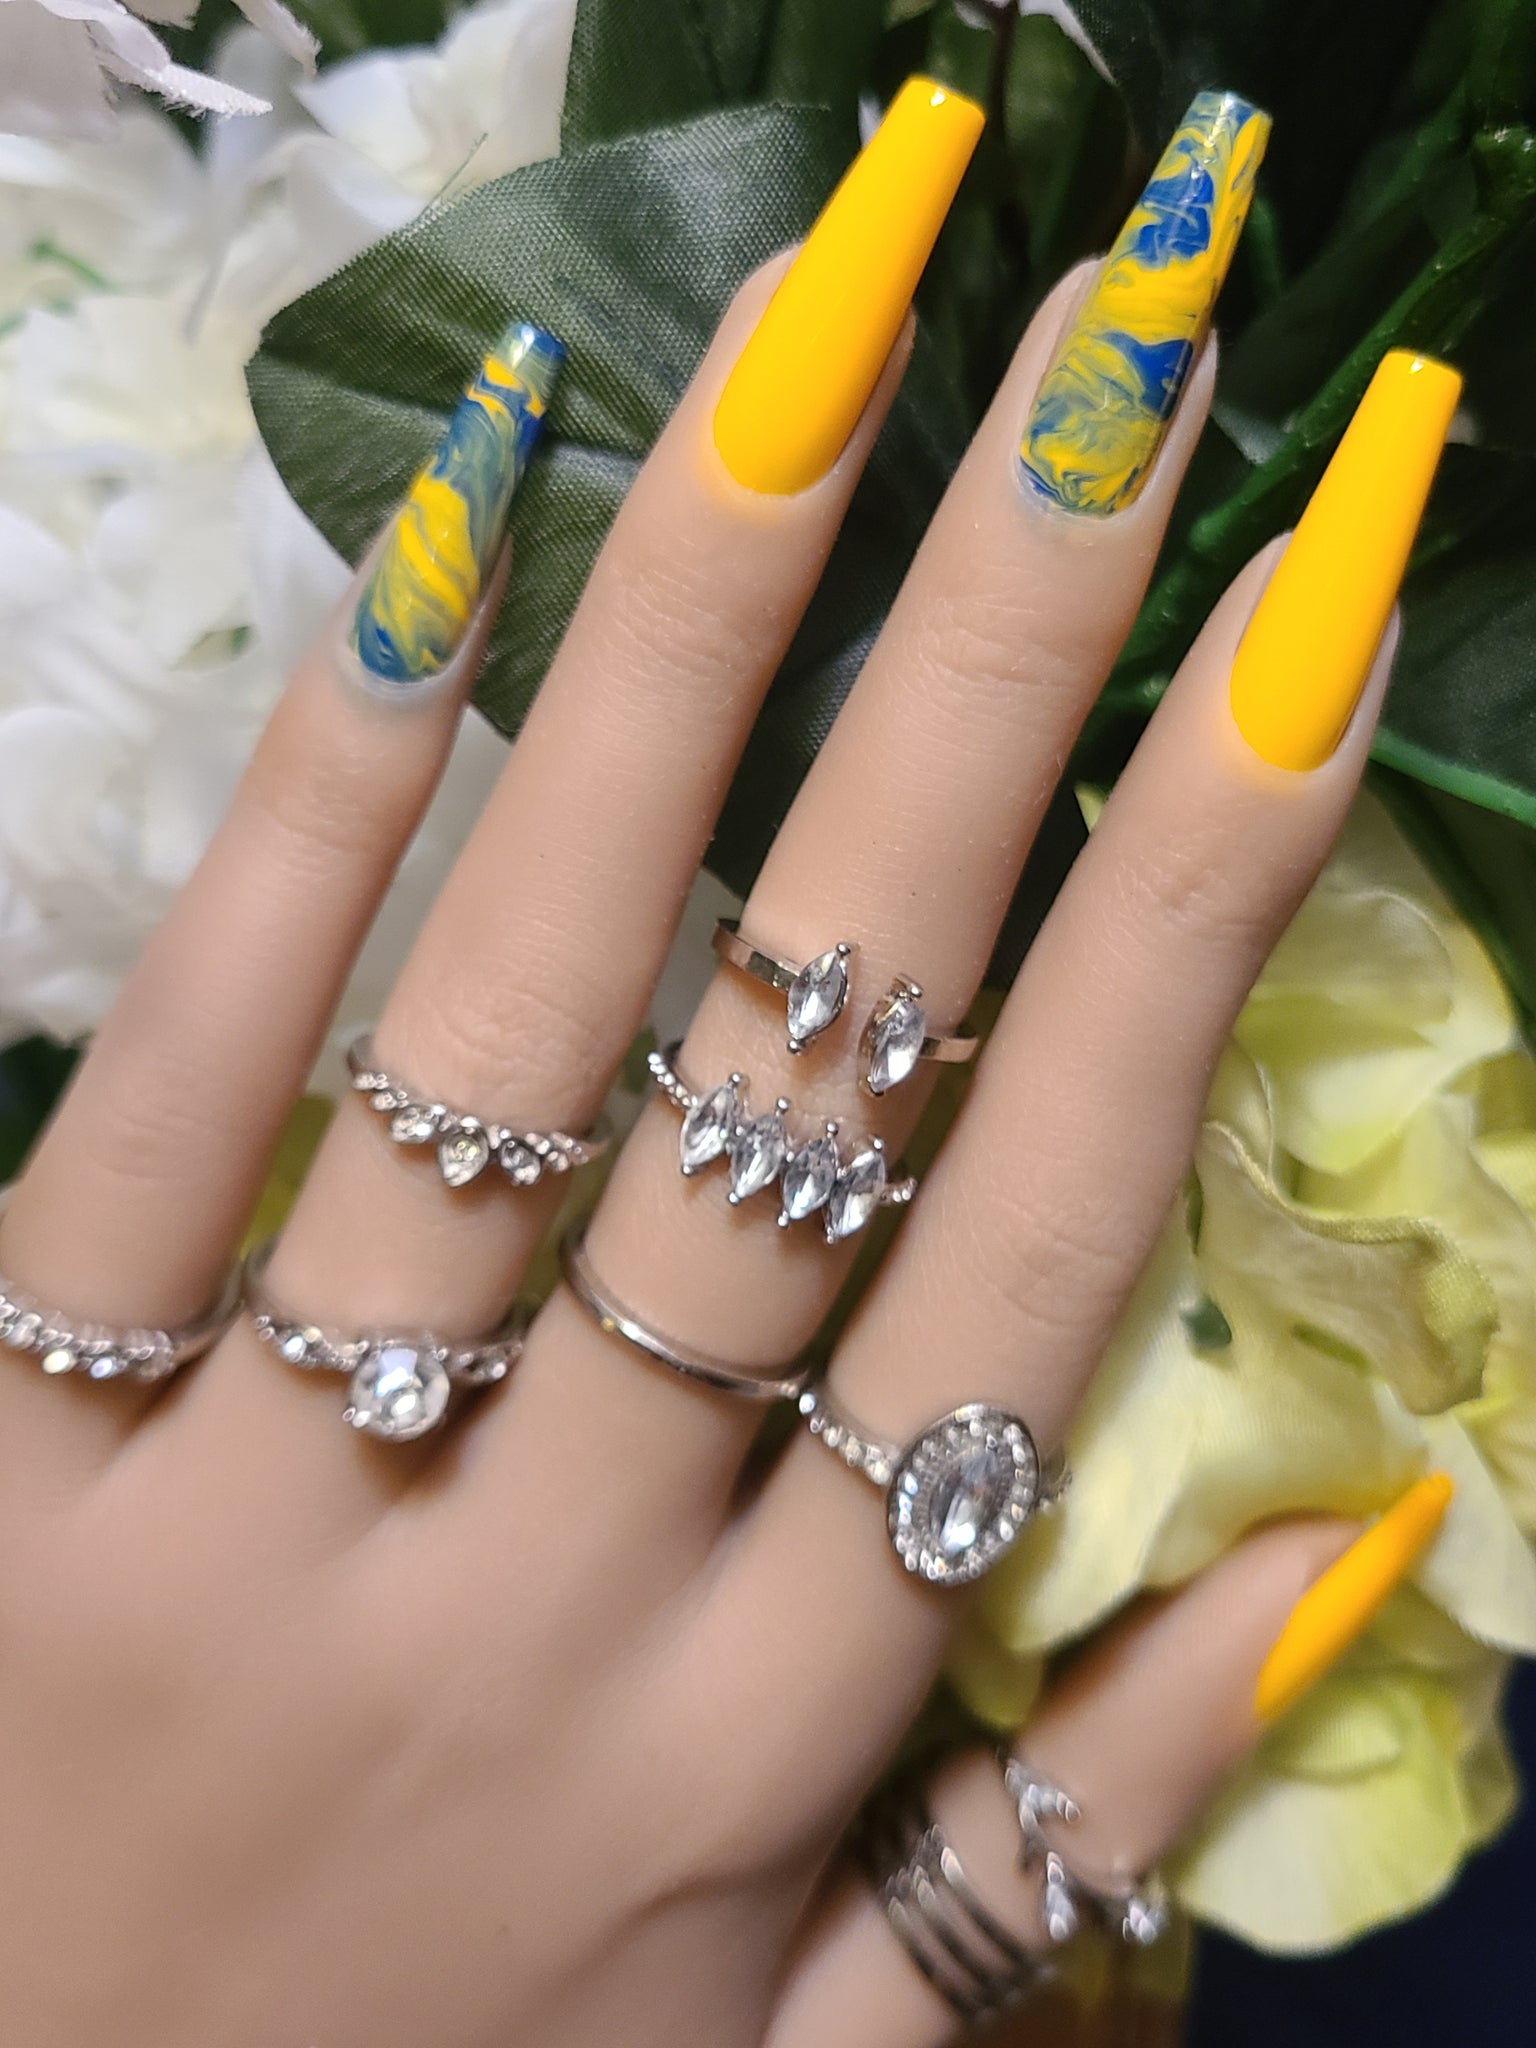 25 Gorgeous Yellow Nails to Spice Up Your Fashion